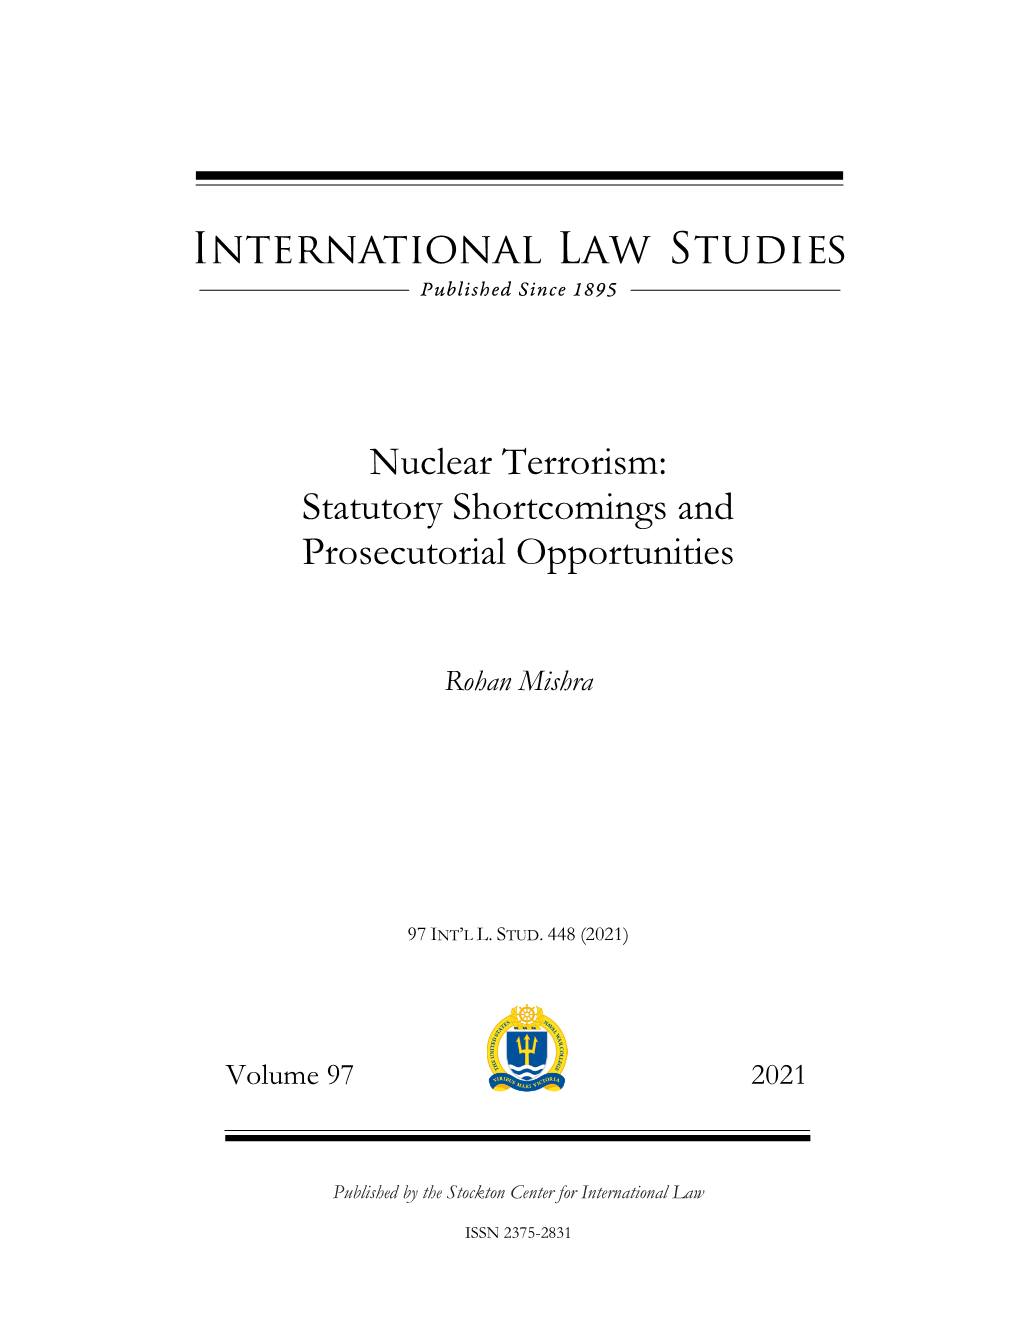 Nuclear Terrorism: Statutory Shortcomings and Prosecutorial Opportunities